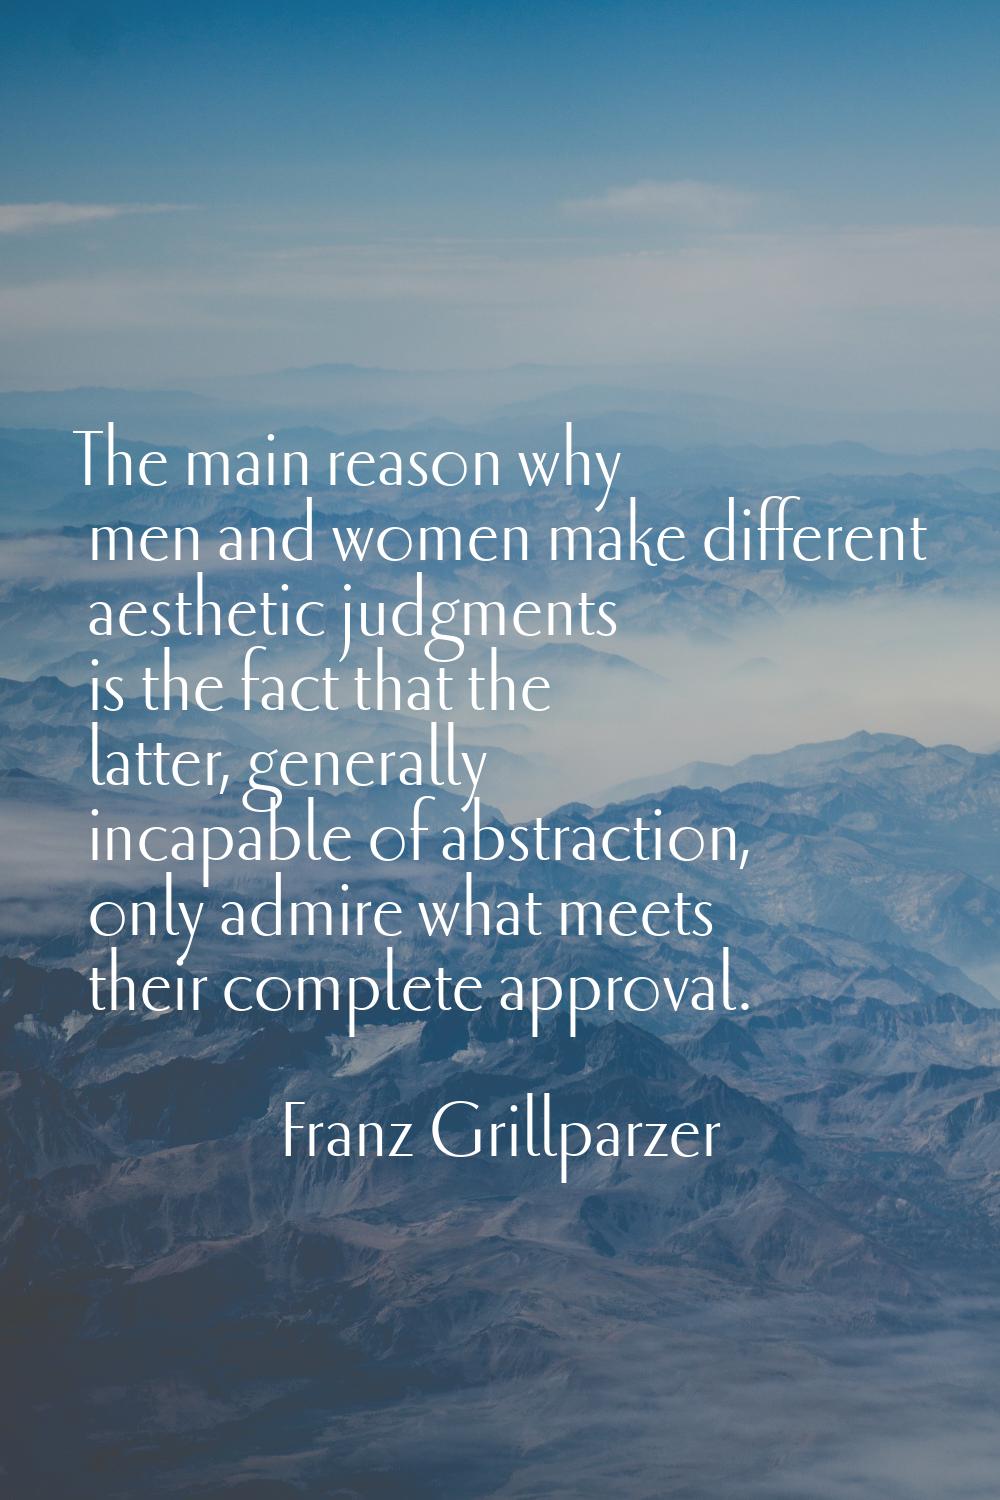 The main reason why men and women make different aesthetic judgments is the fact that the latter, g